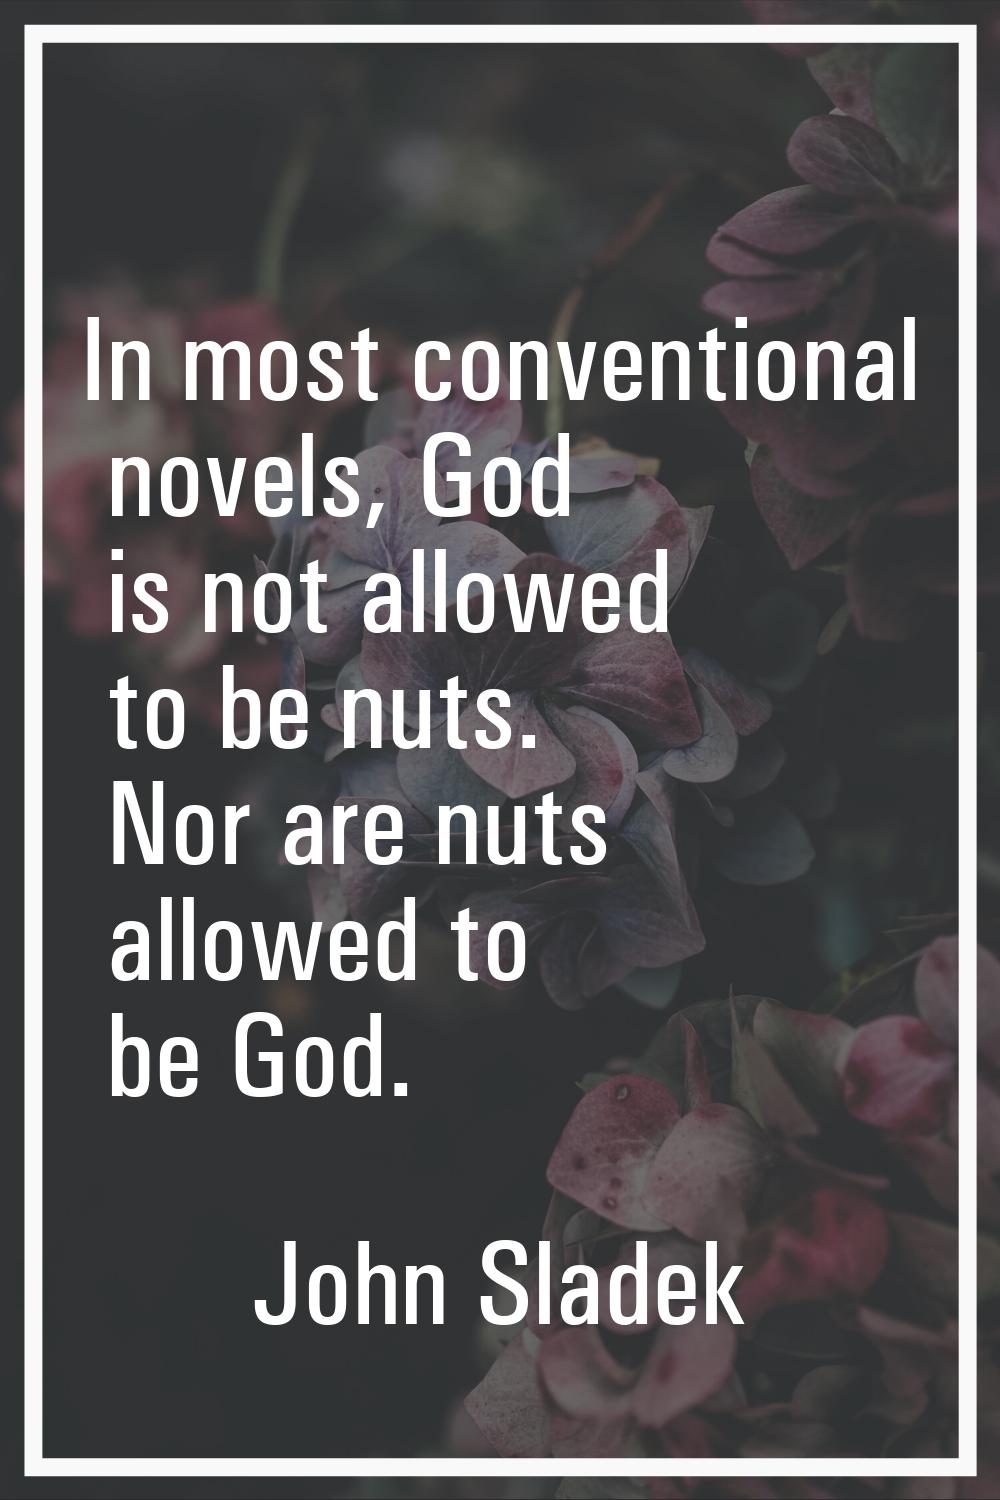 In most conventional novels, God is not allowed to be nuts. Nor are nuts allowed to be God.